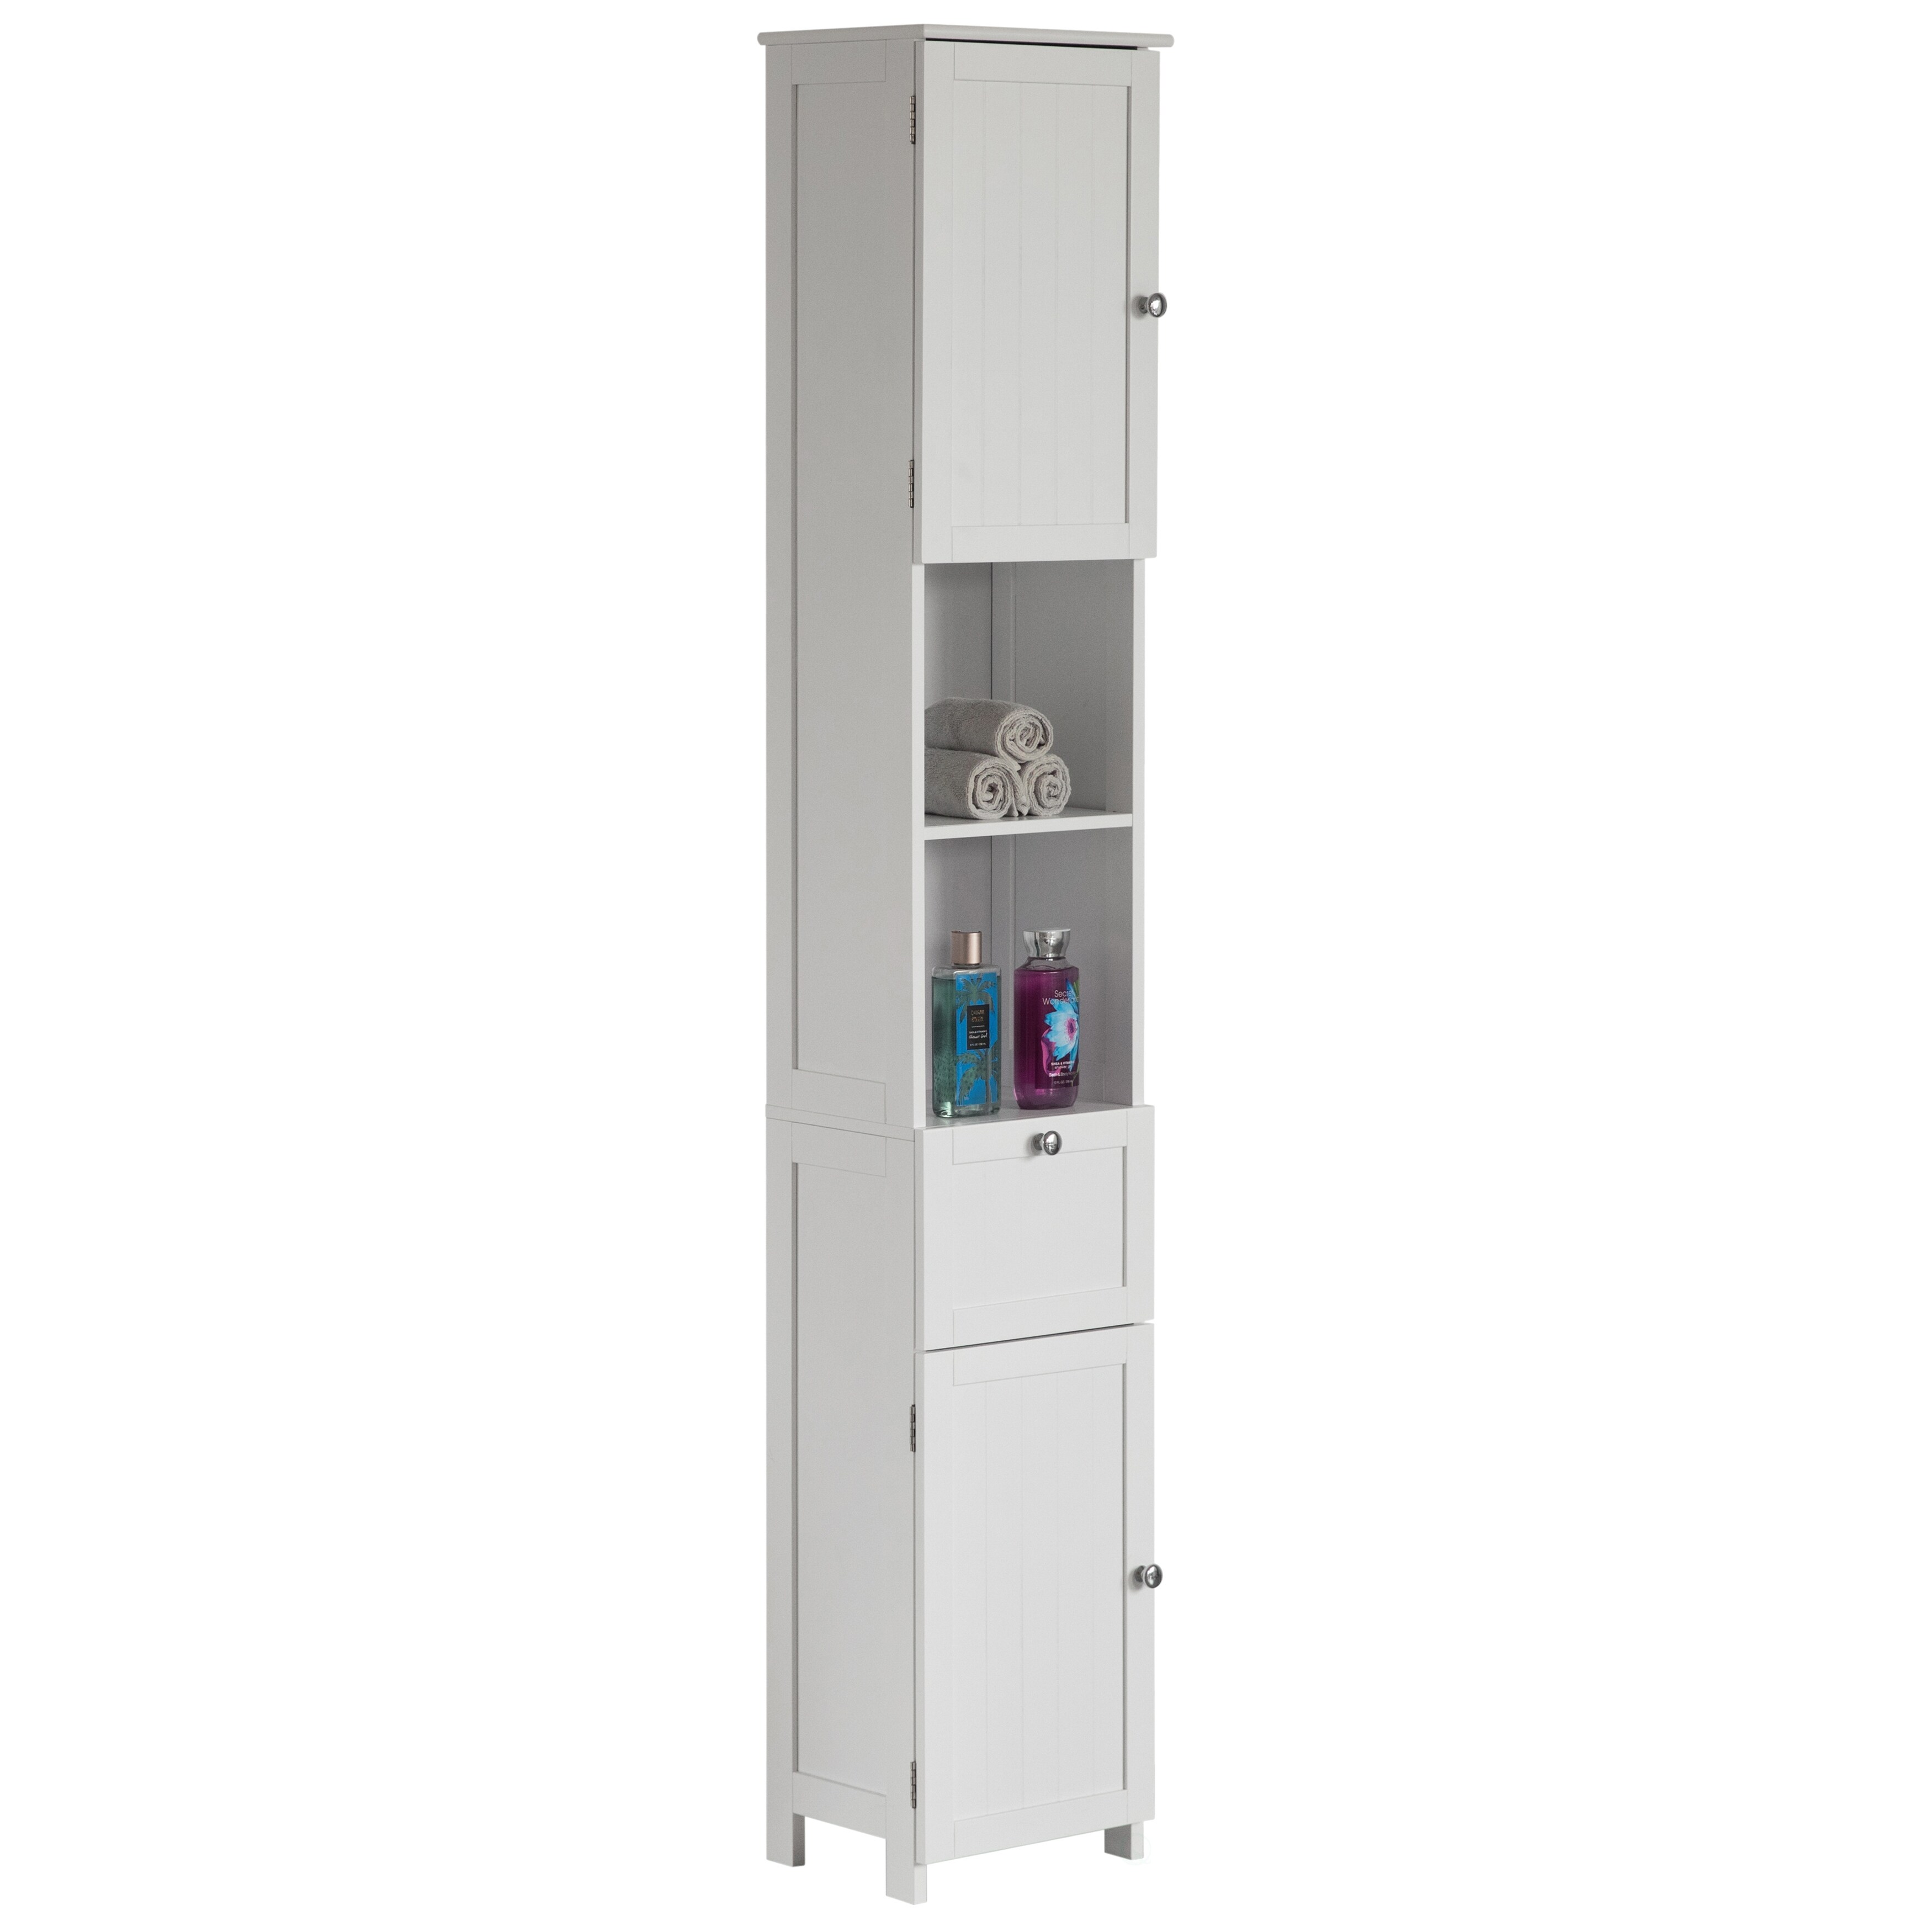 https://ak1.ostkcdn.com/images/products/is/images/direct/8ddc9ae81ffe338fa9814eb234b2c6d340f07218/White-Tall-Standing-Bathroom-Linen-Tower-Storage-Cabinet.jpg